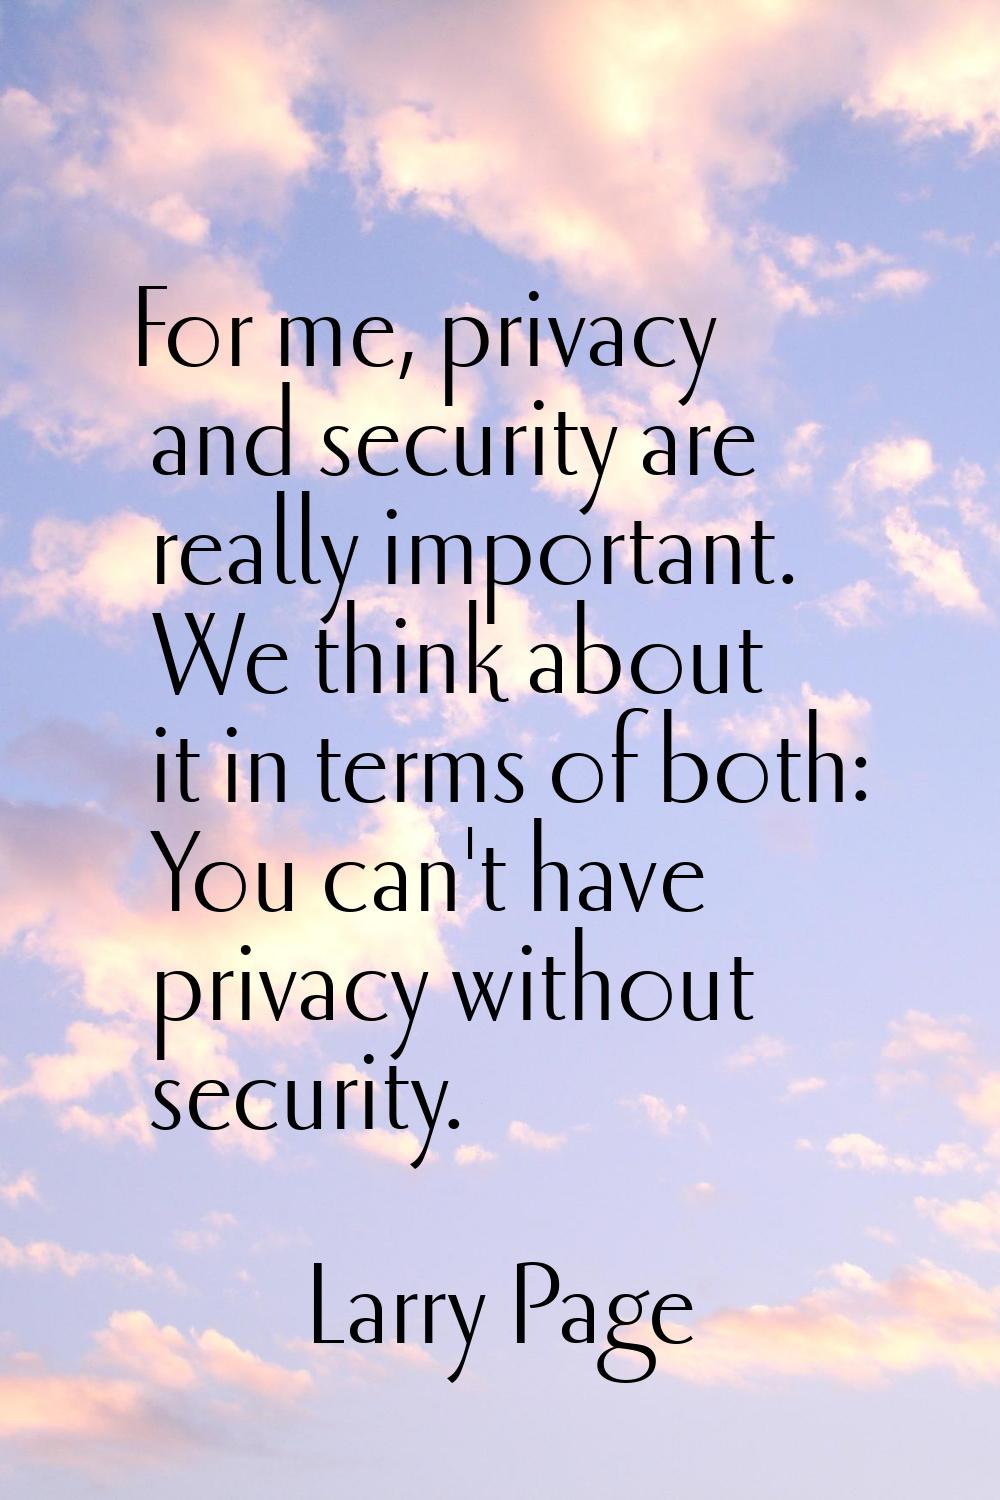 For me, privacy and security are really important. We think about it in terms of both: You can't ha